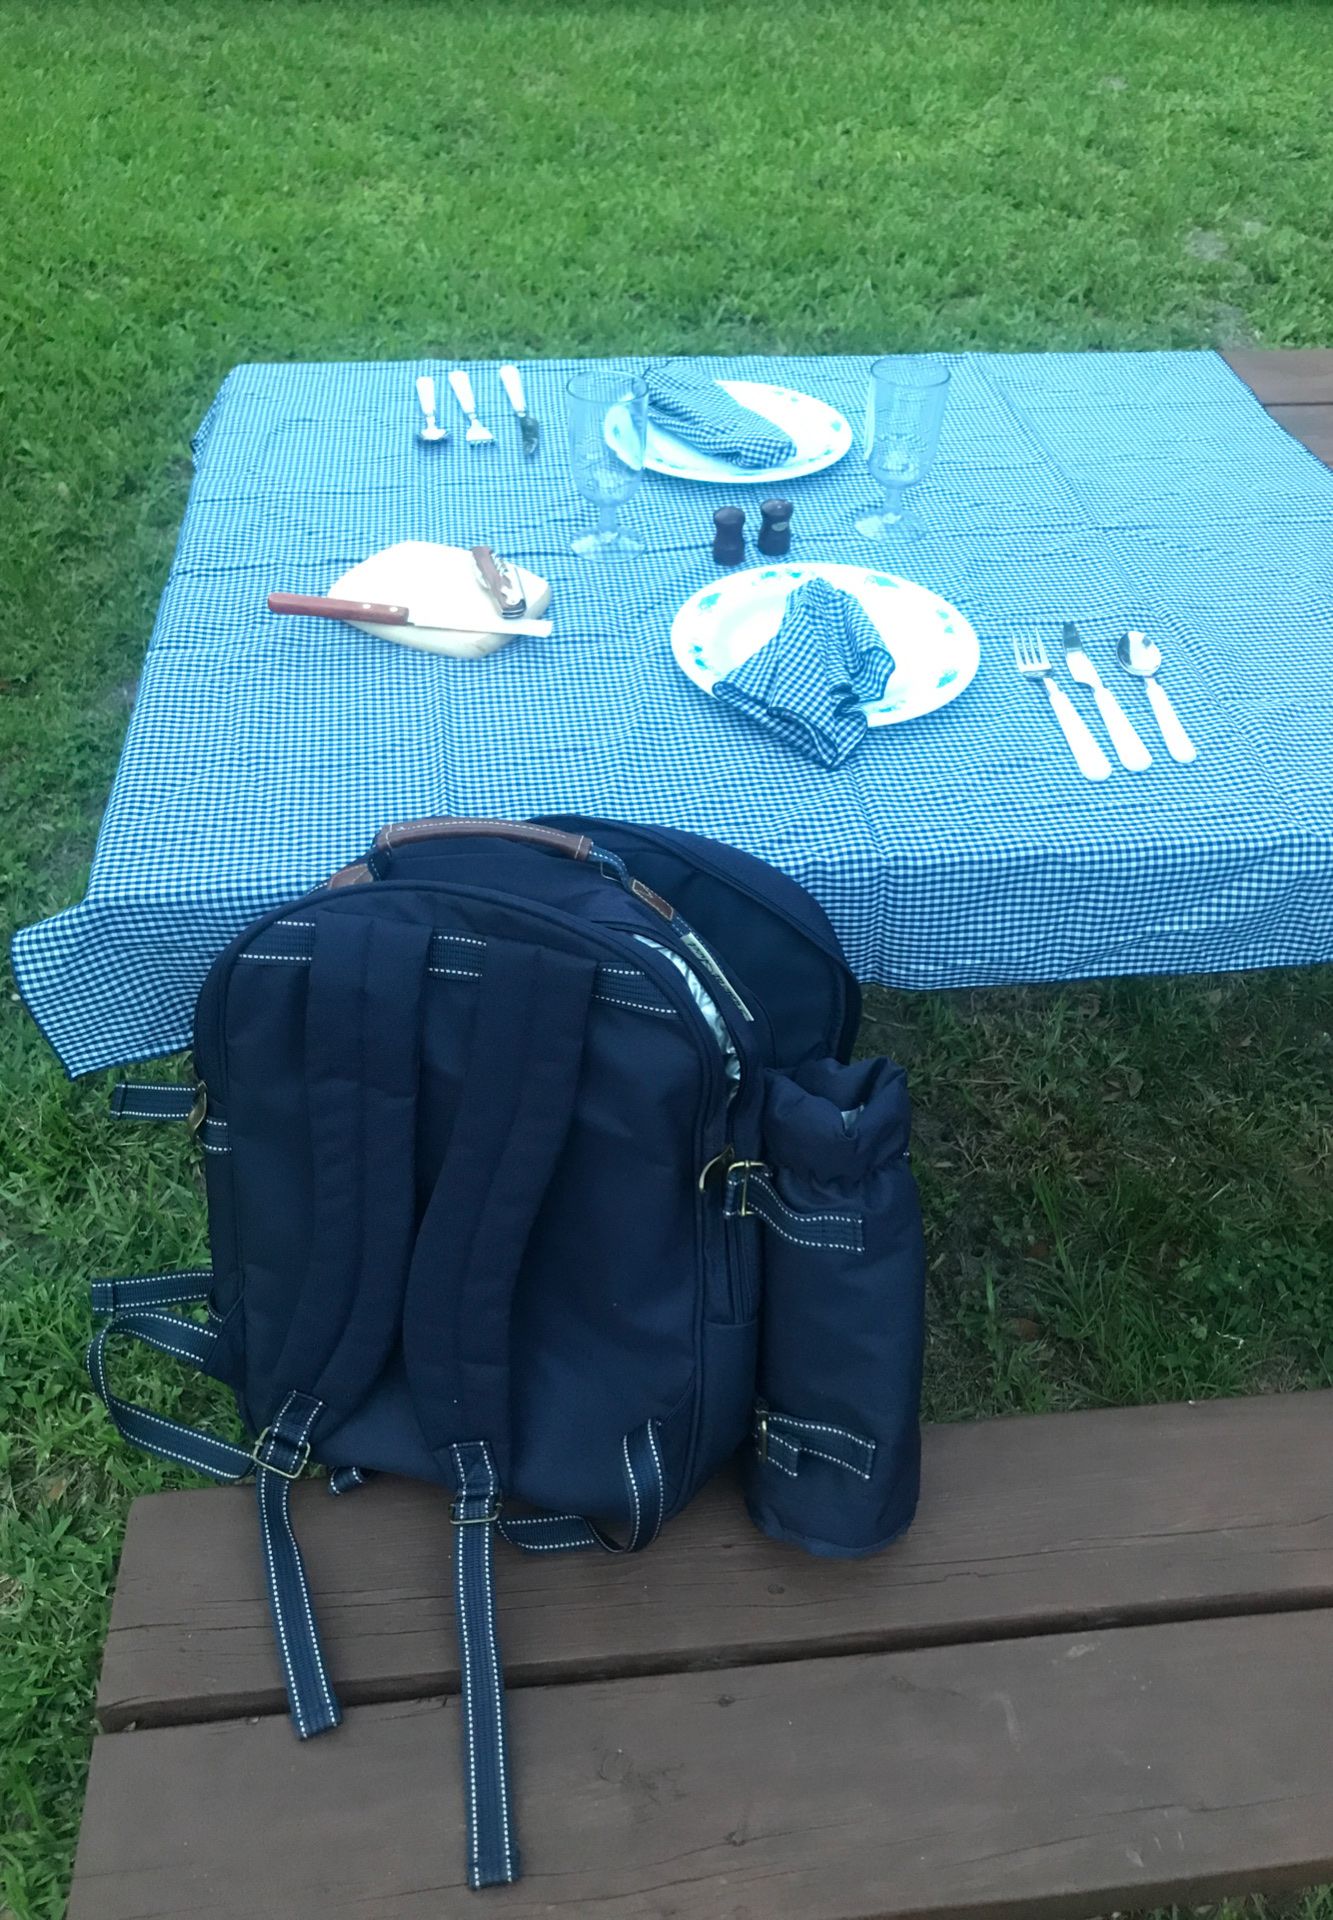 Picnic backpack with accessories